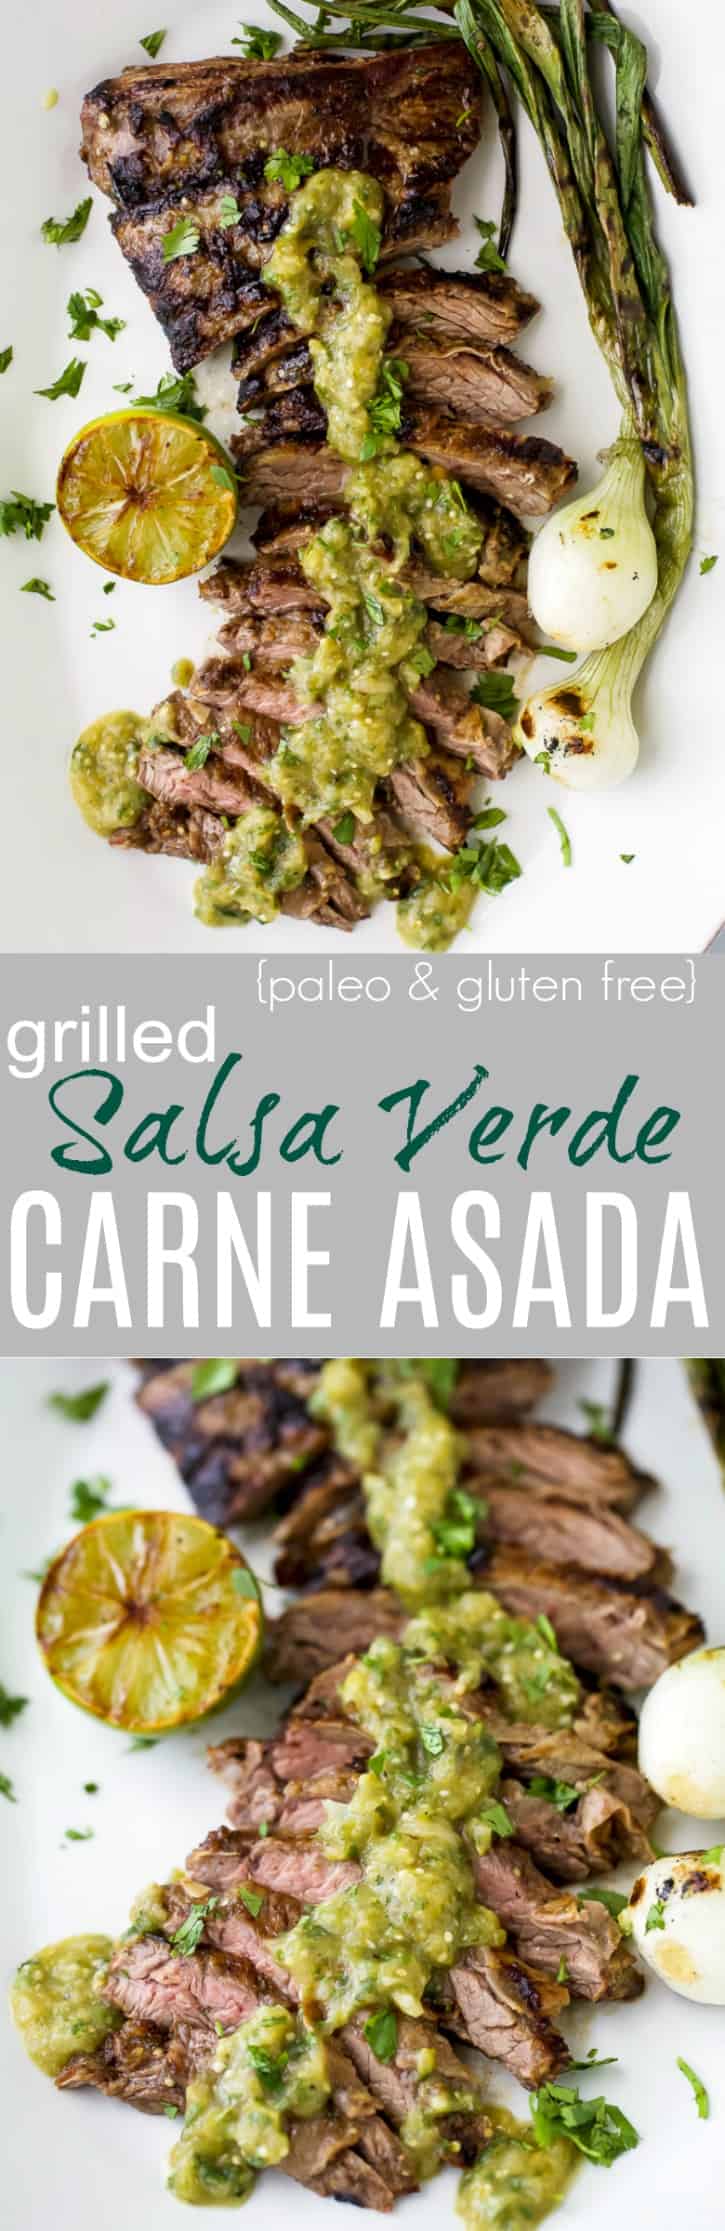 Tender grilled Carne Asada that's marinaded in a homemade Salsa Verde then charred to perfection for one authentic mexican dish! This flavorful low carb Carne Asada will be a hit at your house! Great for a weeknight dinner or dinner parties! #paleo #glutenfree